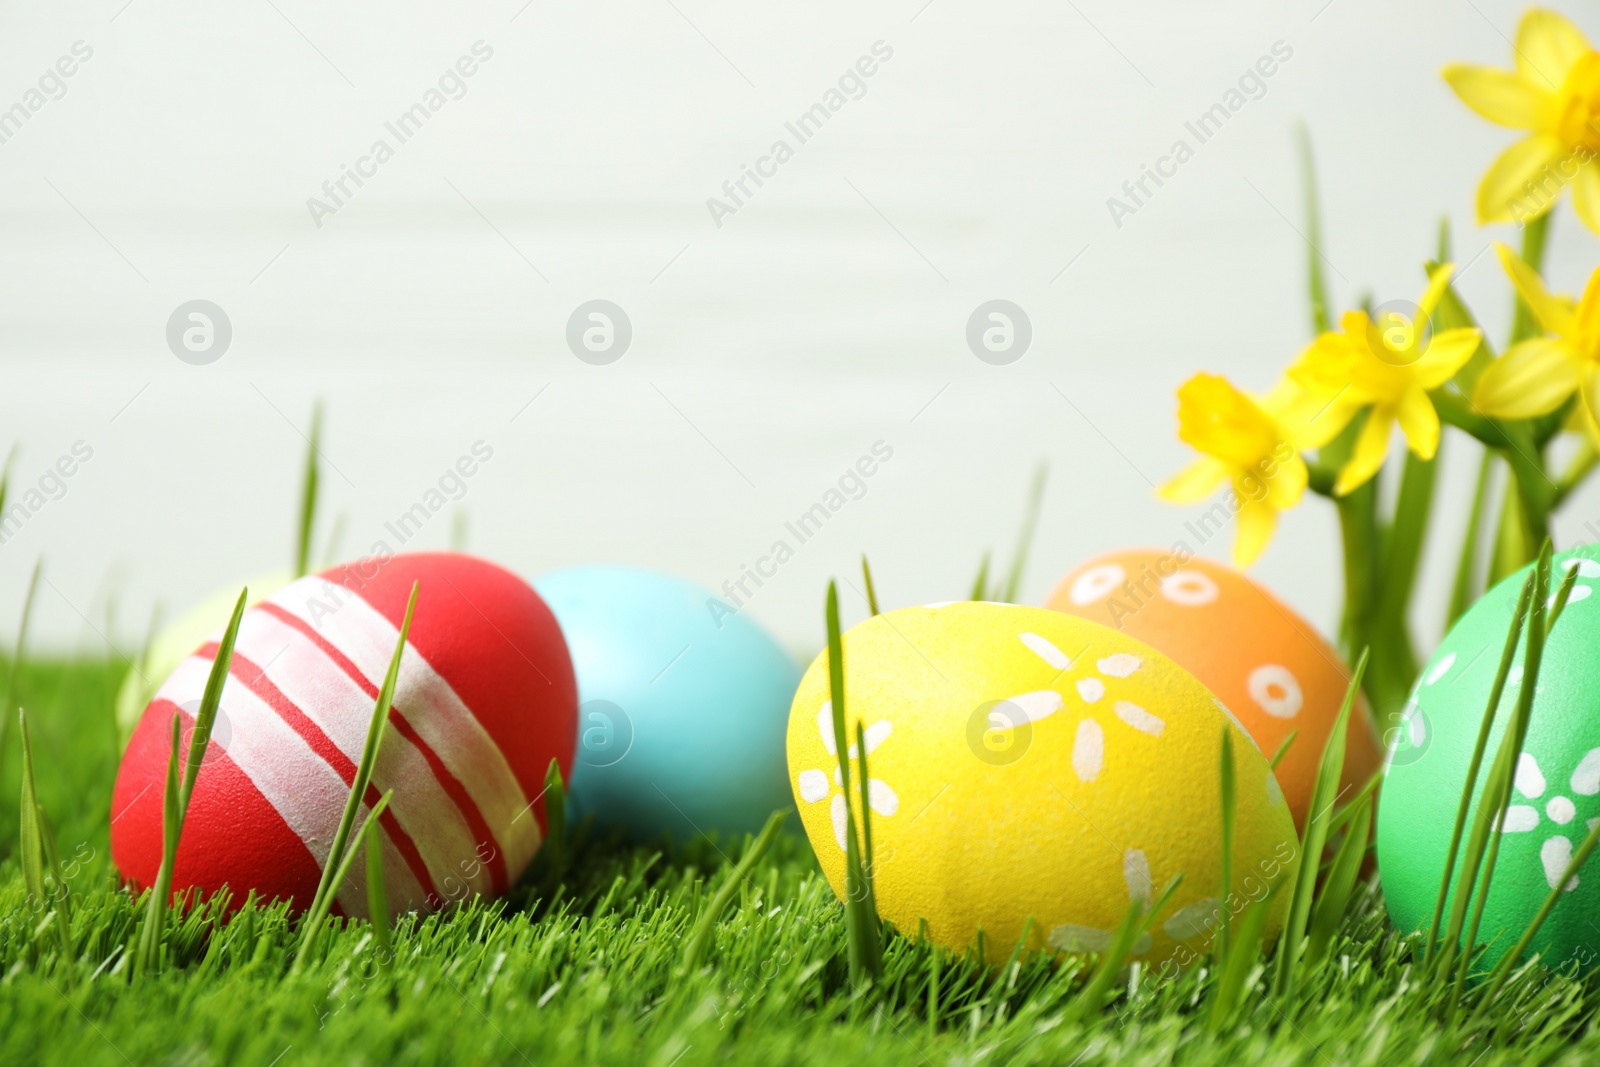 Photo of Colorful Easter eggs and narcissus flowers in green grass against white background. Space for text